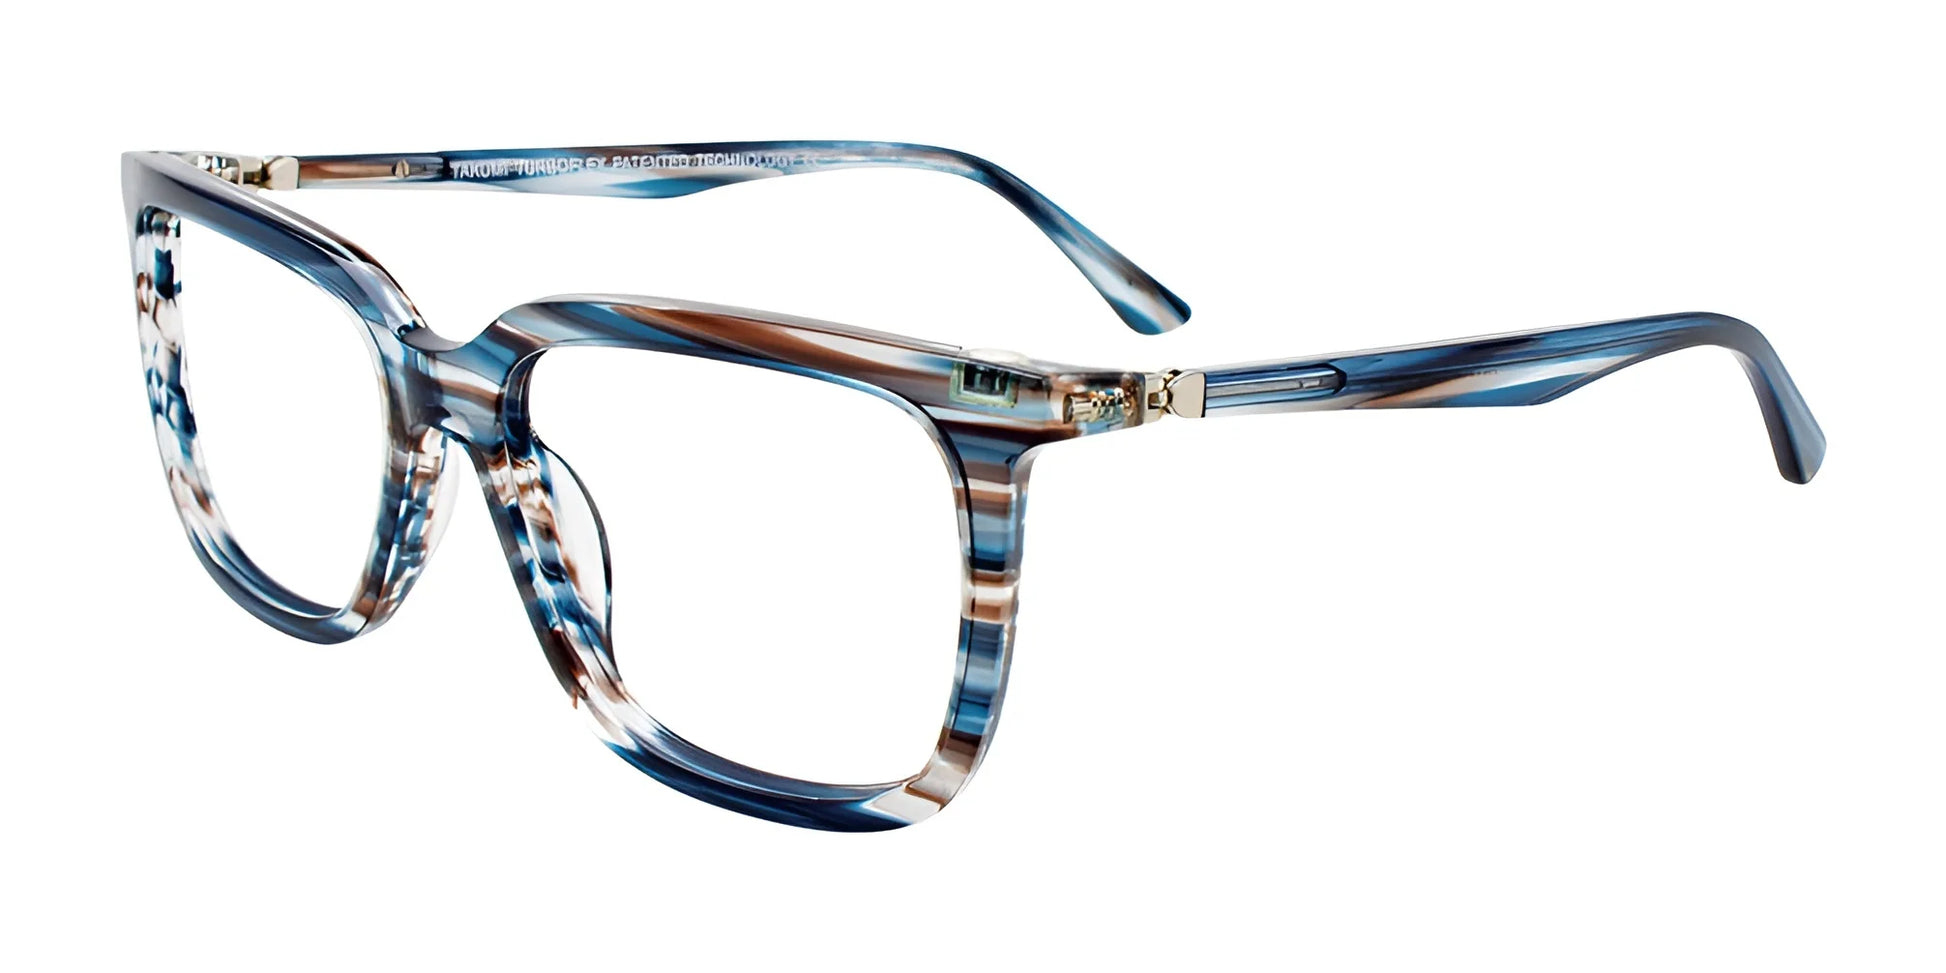 Takumi TK1116 Eyeglasses with Clip-on Sunglasses Blue & Brown Marbled